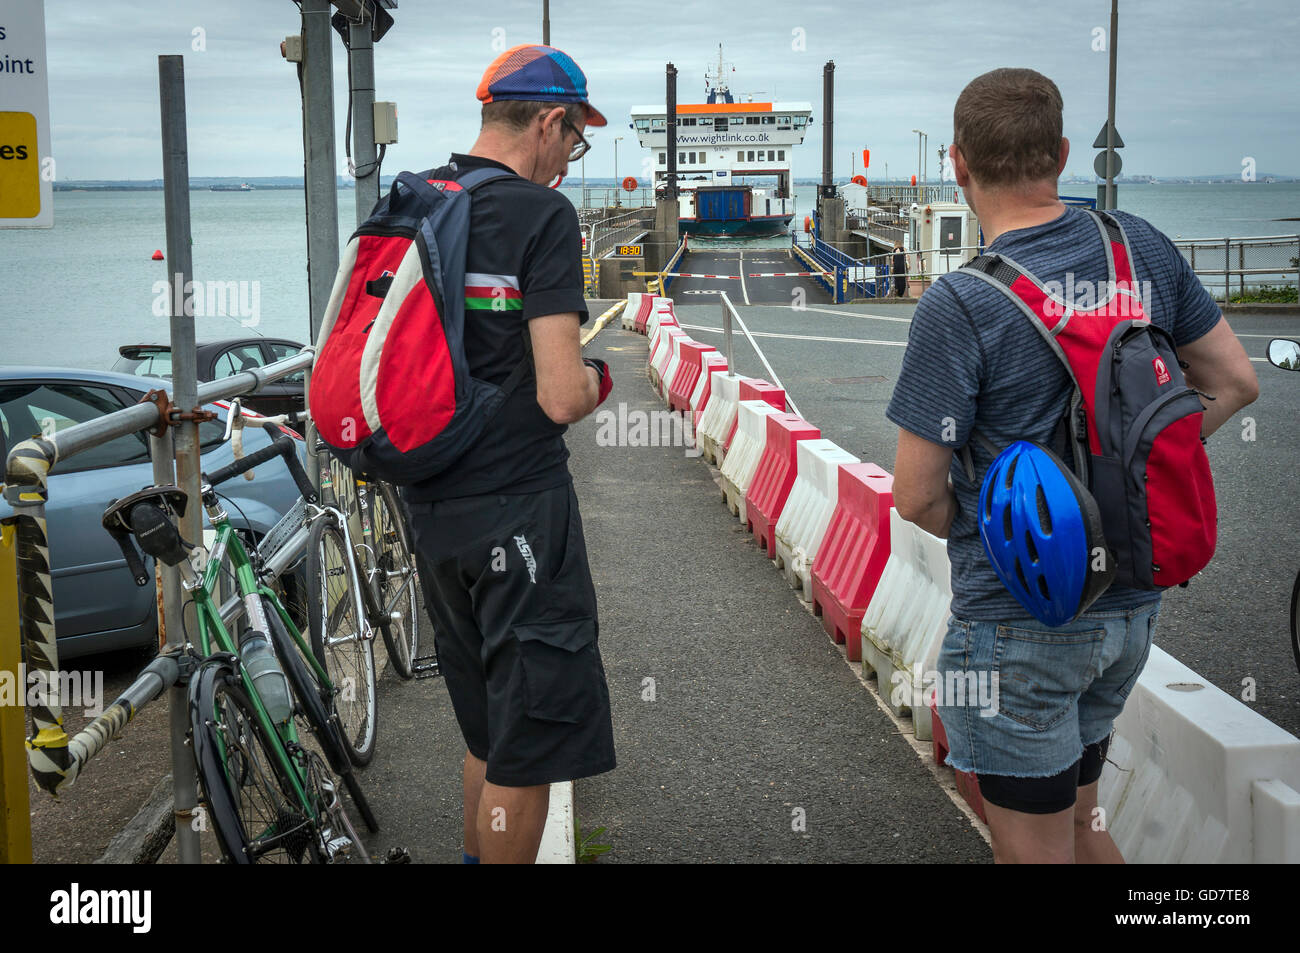 Cyclists waiting to board the Wightlink ferry from Fishbourne on the Isle of Wight, UK Stock Photo